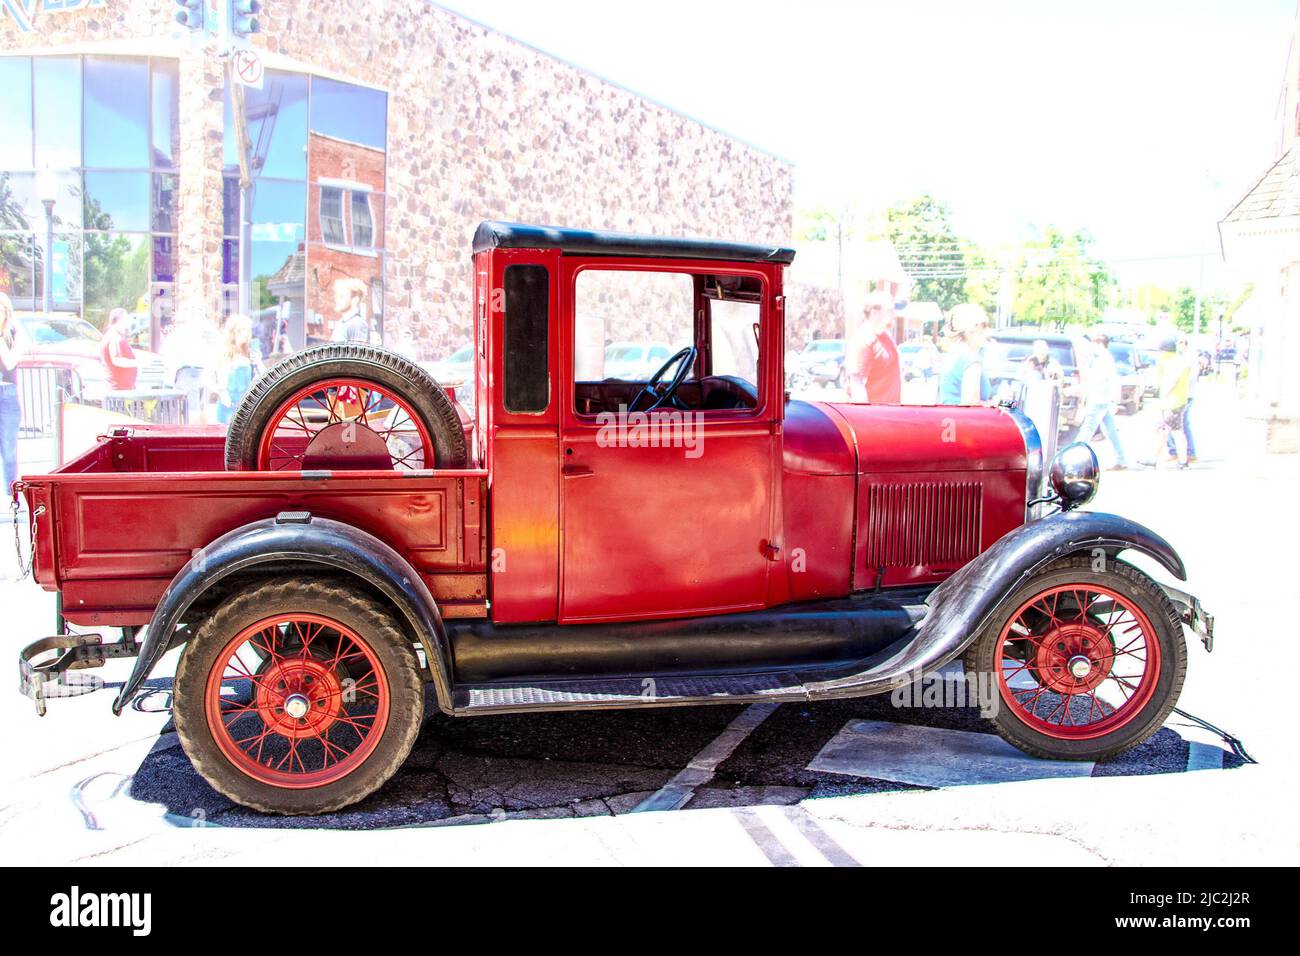 4-30-2022 Tahlequah OK USA - Vintage  red antique truck with wire wheels parked in street at small town event copy space Stock Photo